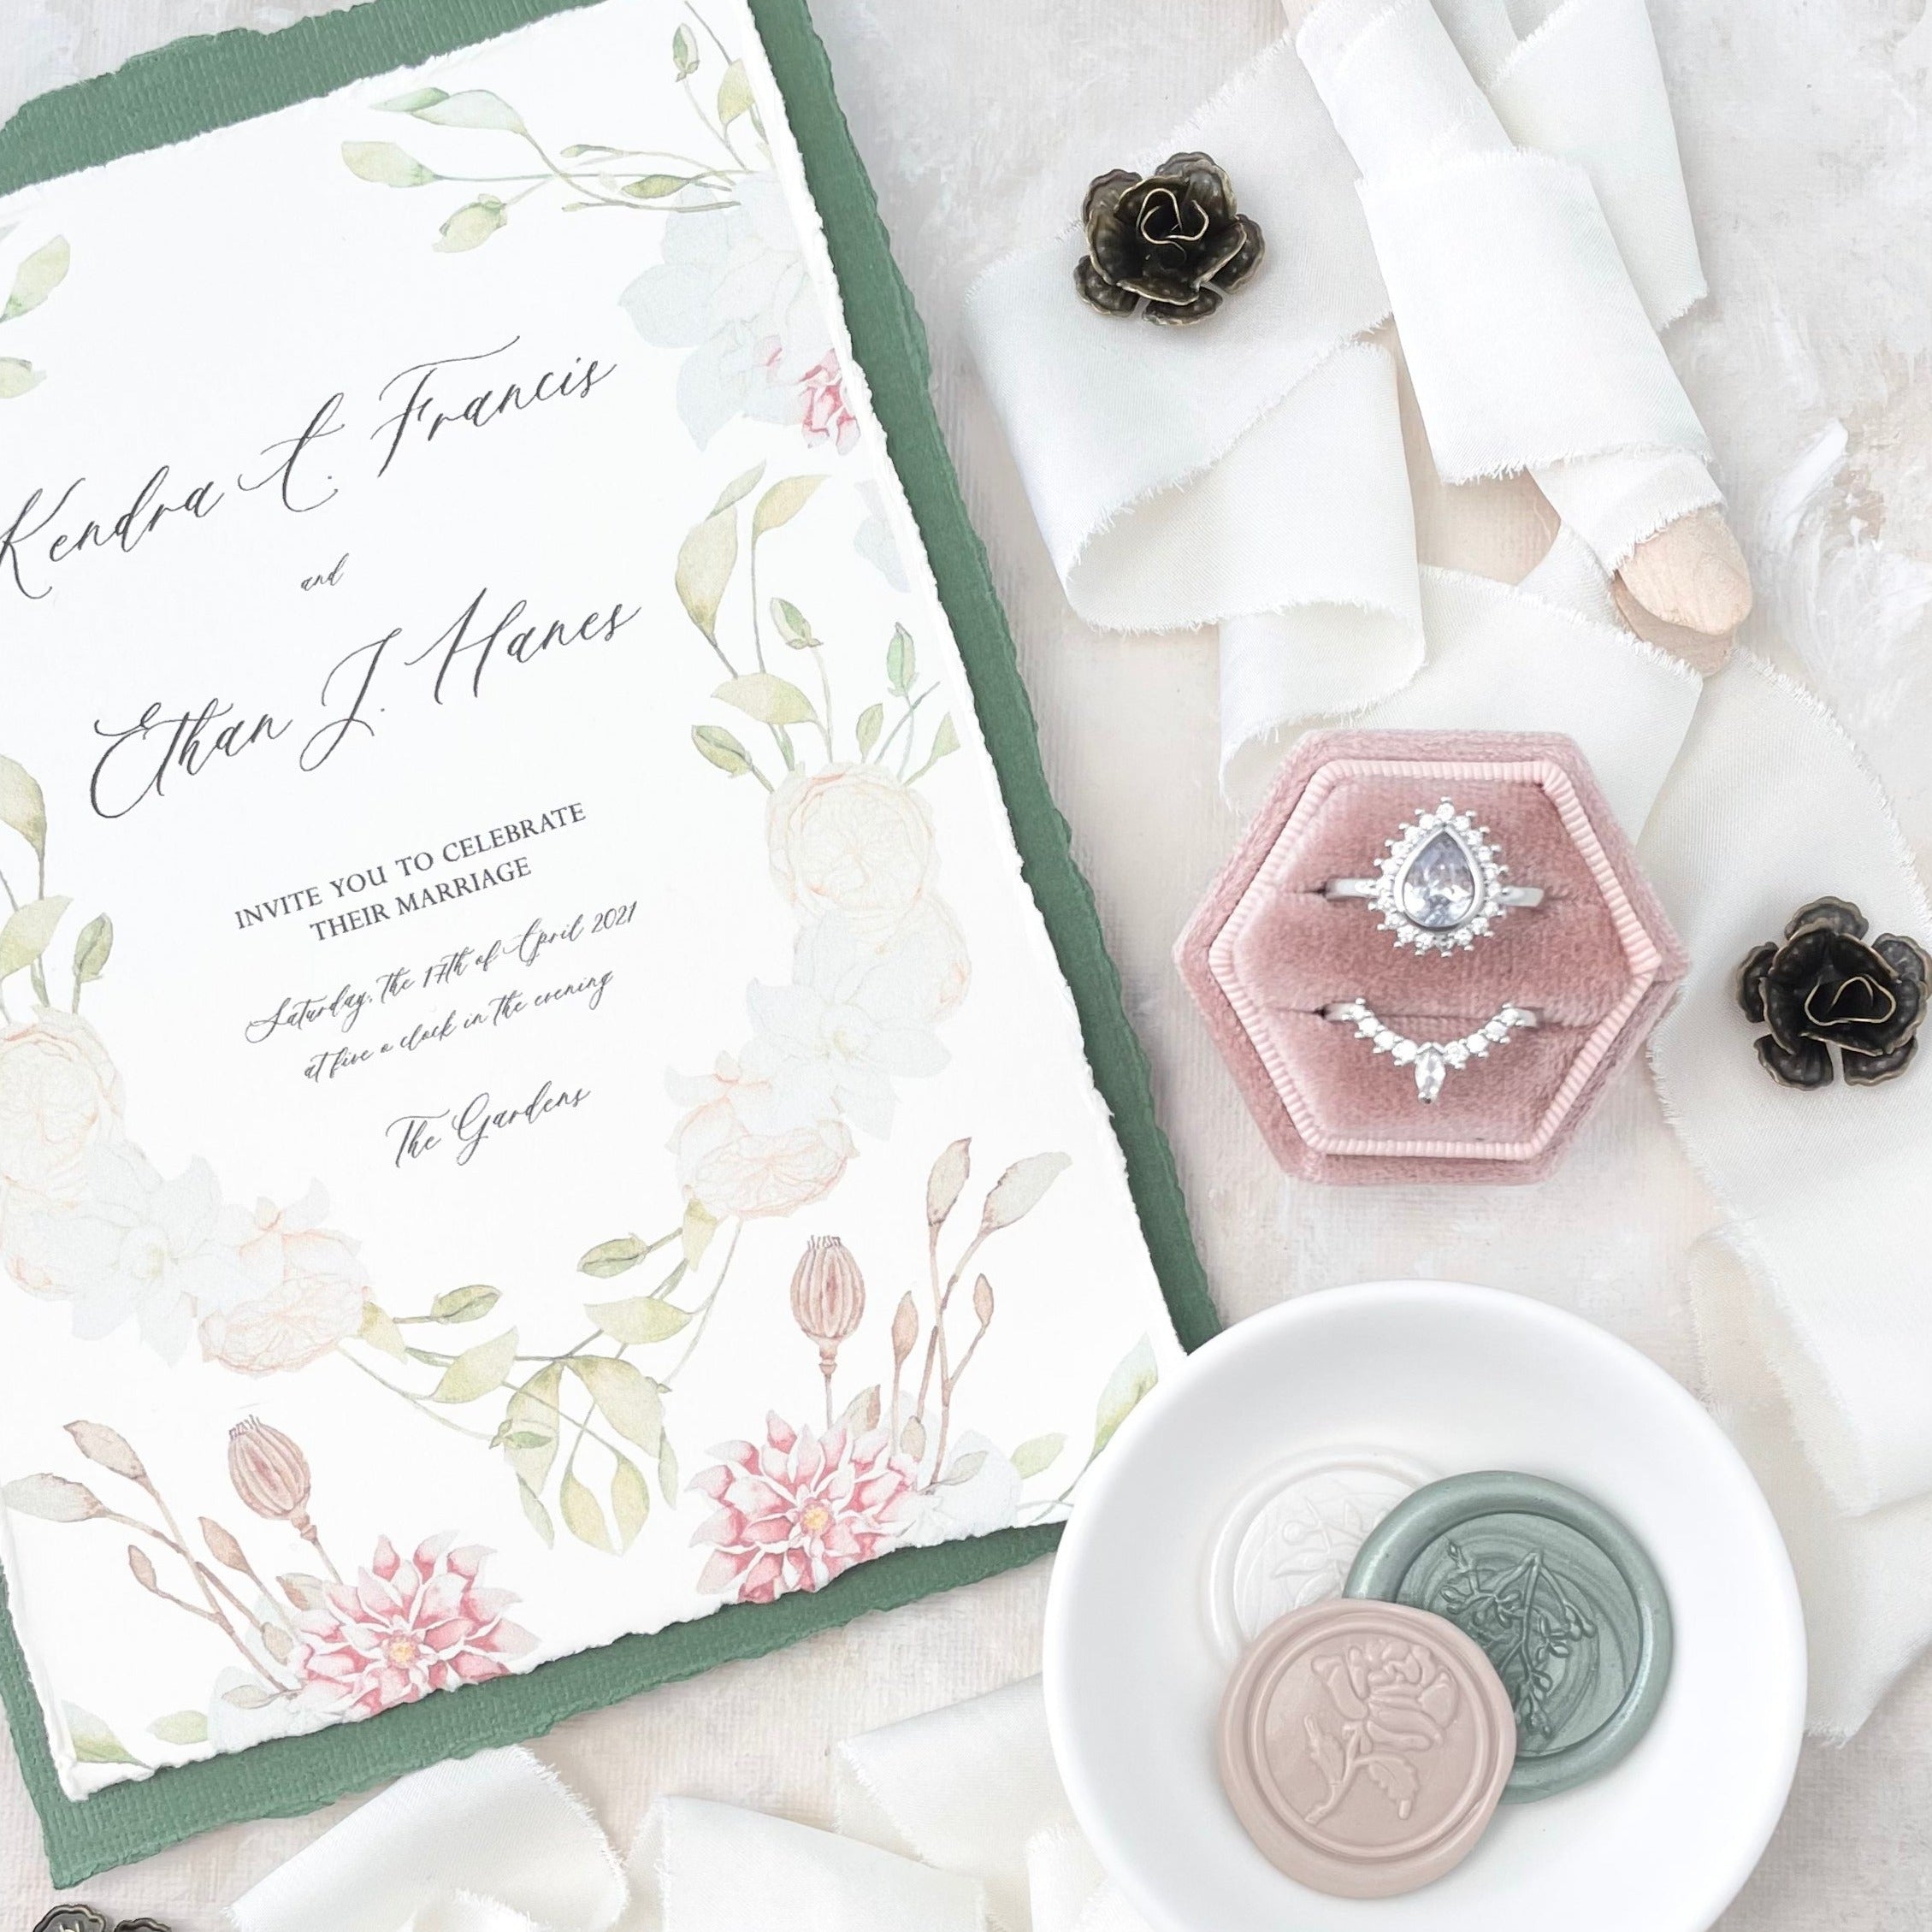 Floral wedding invitation styled with ivory ribbon, 3 wax seals in a white dish, dusty pink velvet ring box, and 2 mini bronze styling flowers -  Flat lay props from Champagne & GRIT 